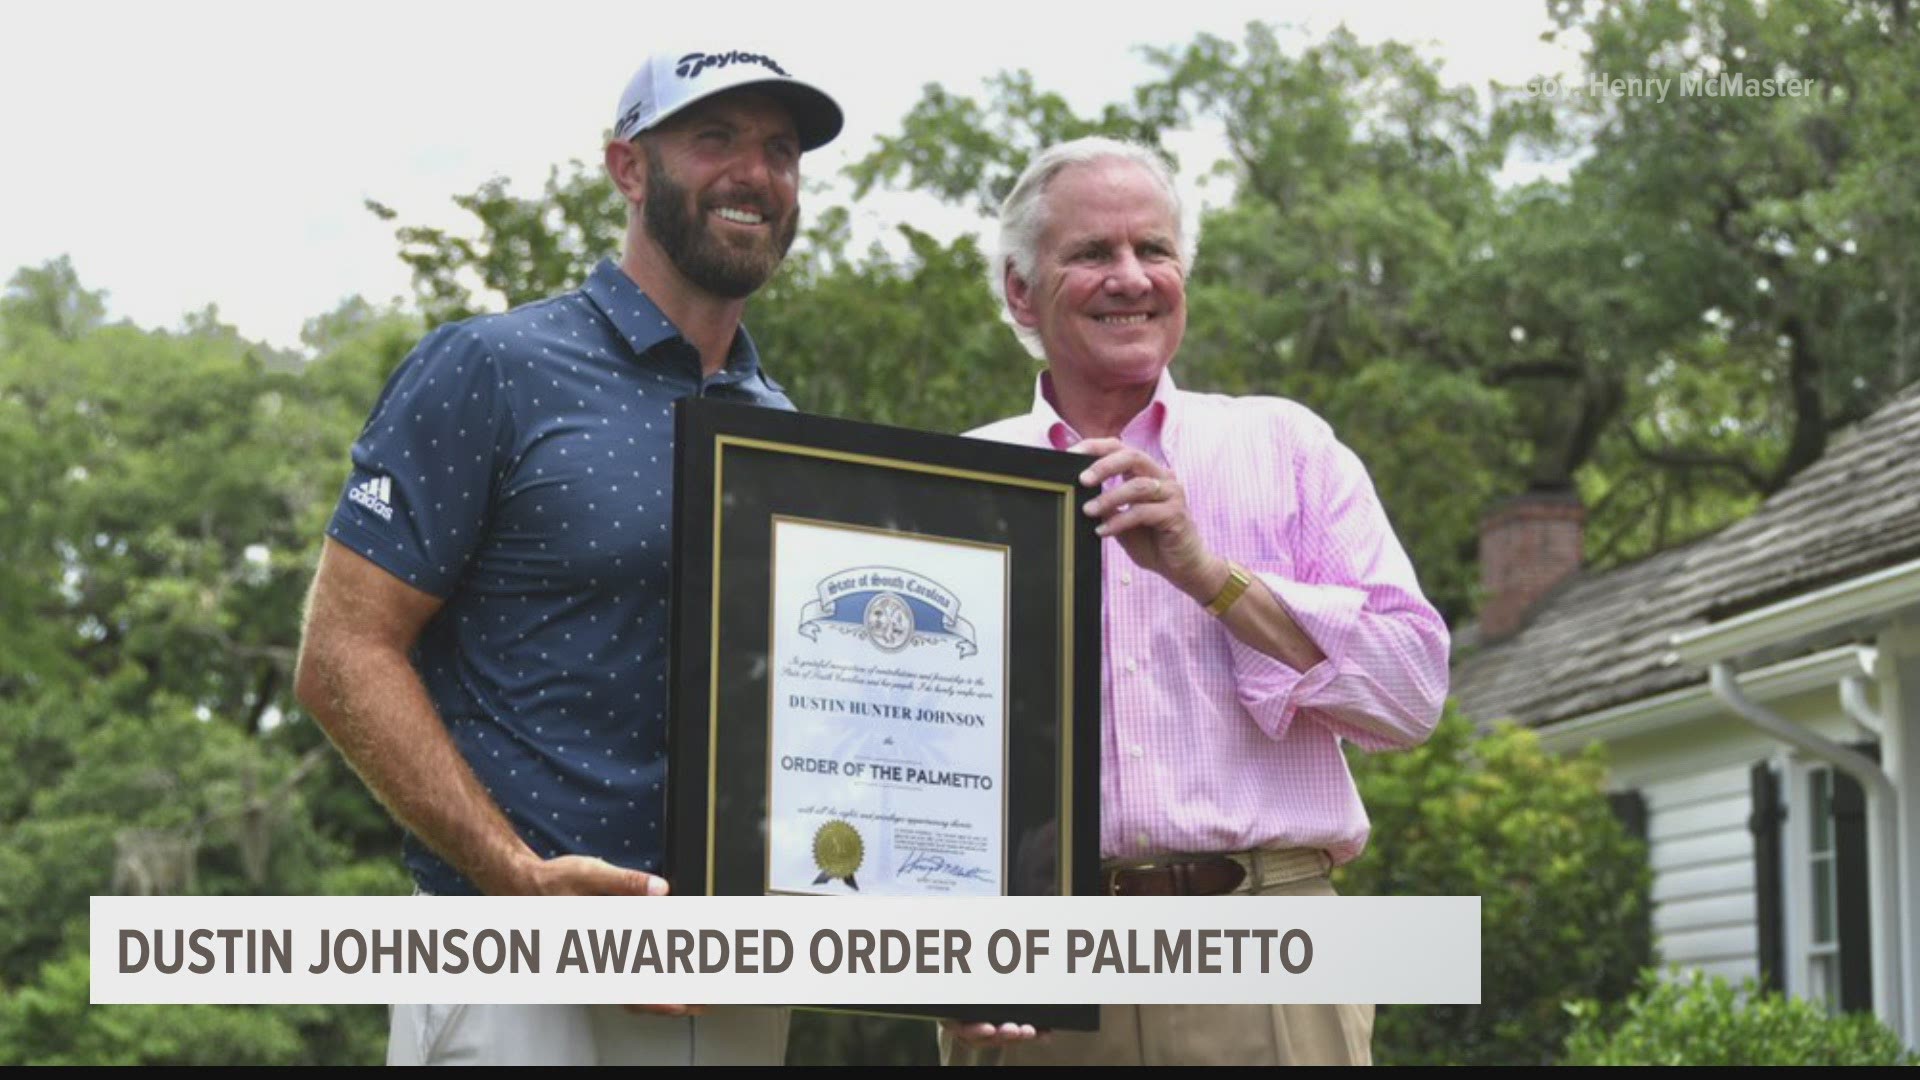 The golfer was awarded the Order of the Palmetto by Gov. McMaster.